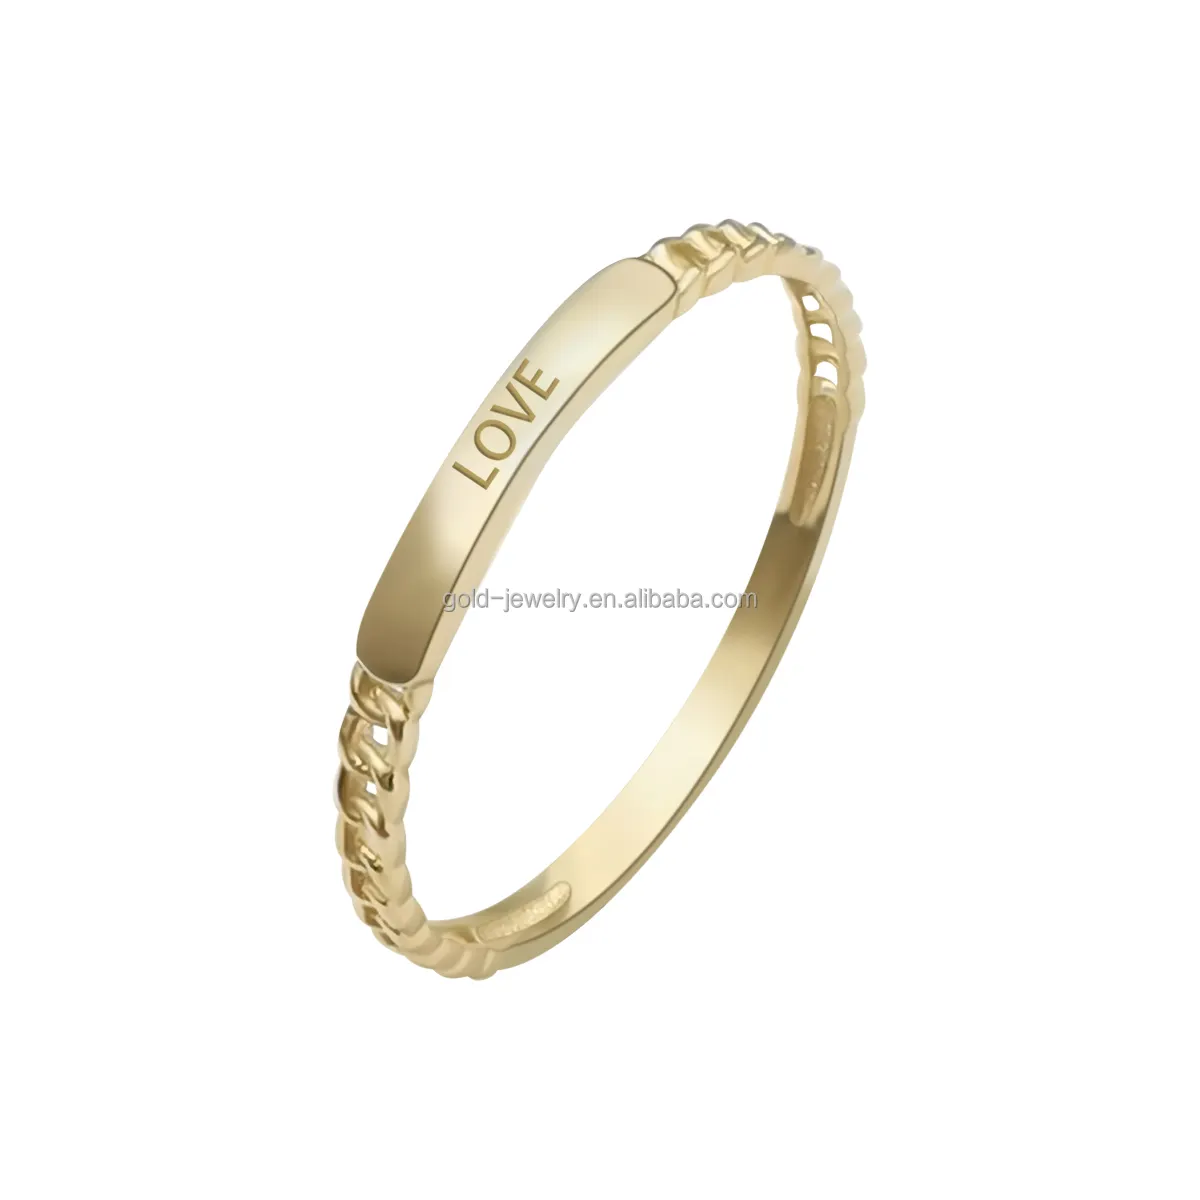 Gold Love Letter Chain Design Women Ring Fashion Gift 9K 14K Real Gold Fashion Jewelry Finger Ring Engagement BandsまたはRings